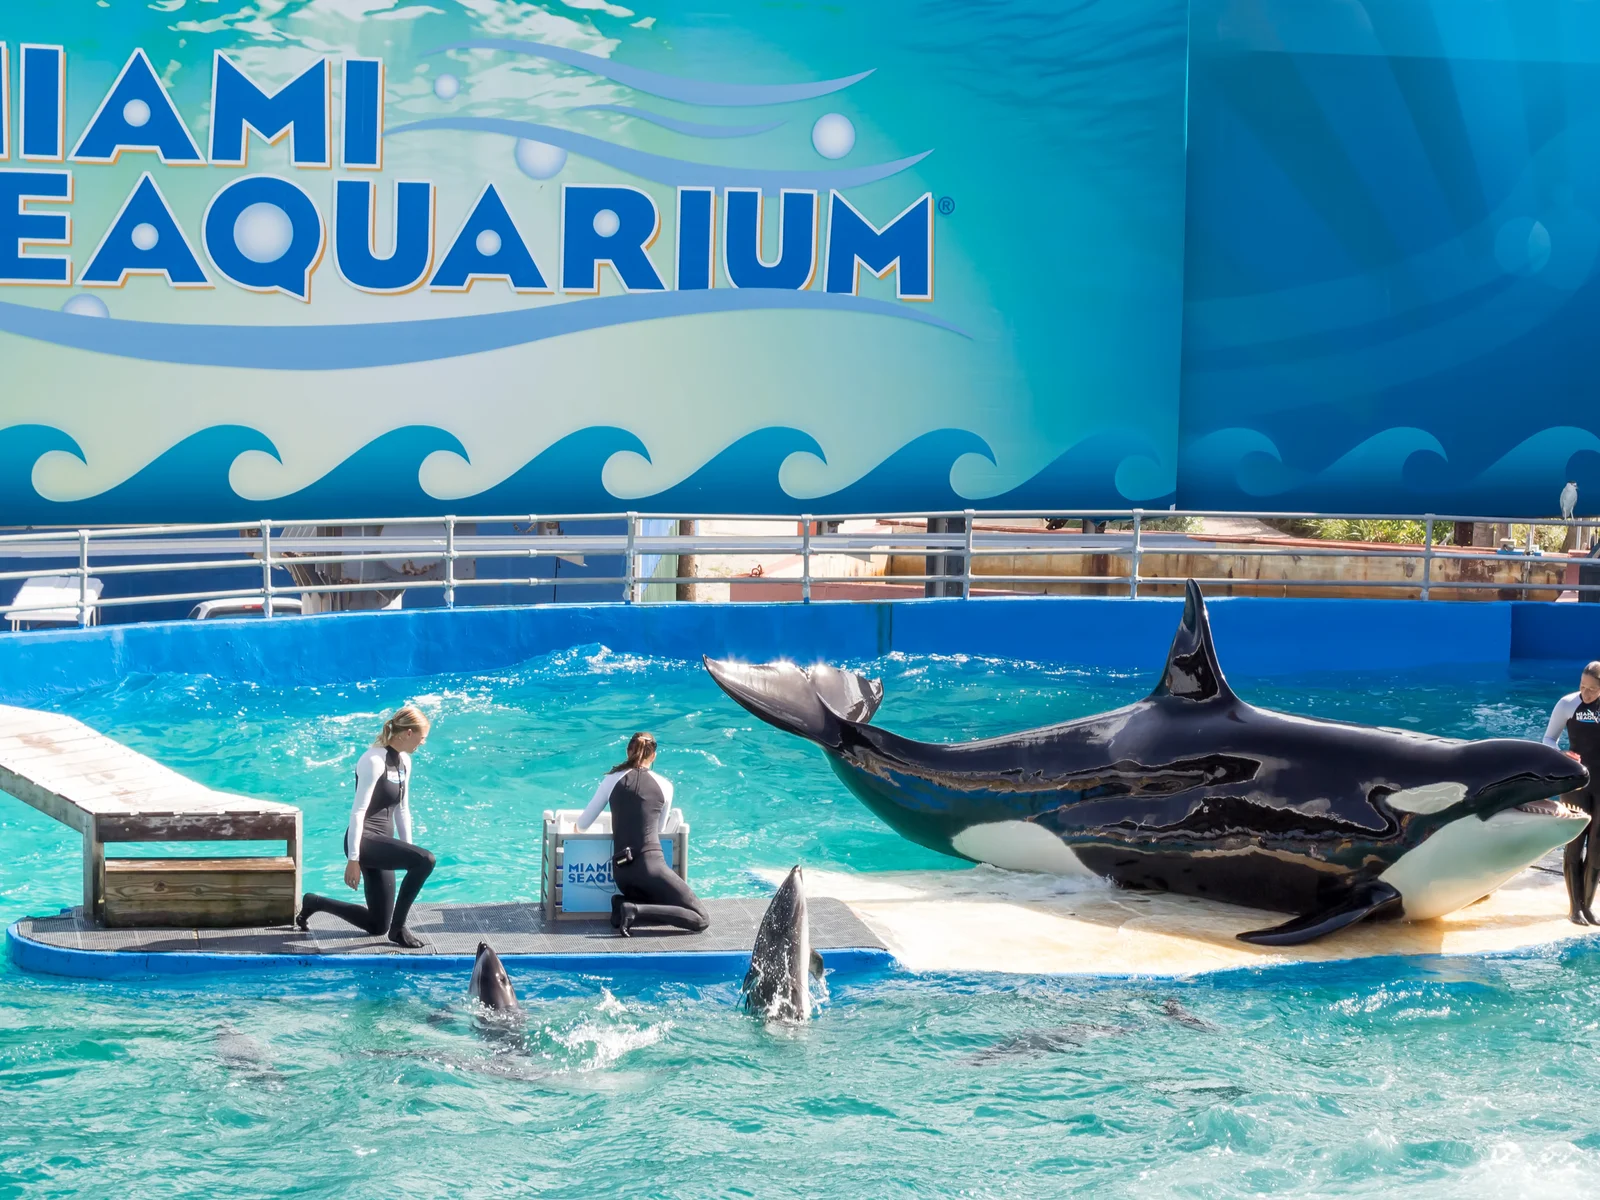 A Killer Whale named Lolita and two Dolphins performing some routines with their trainers at Miami Seaquarium, one of the best aquariums in Florida